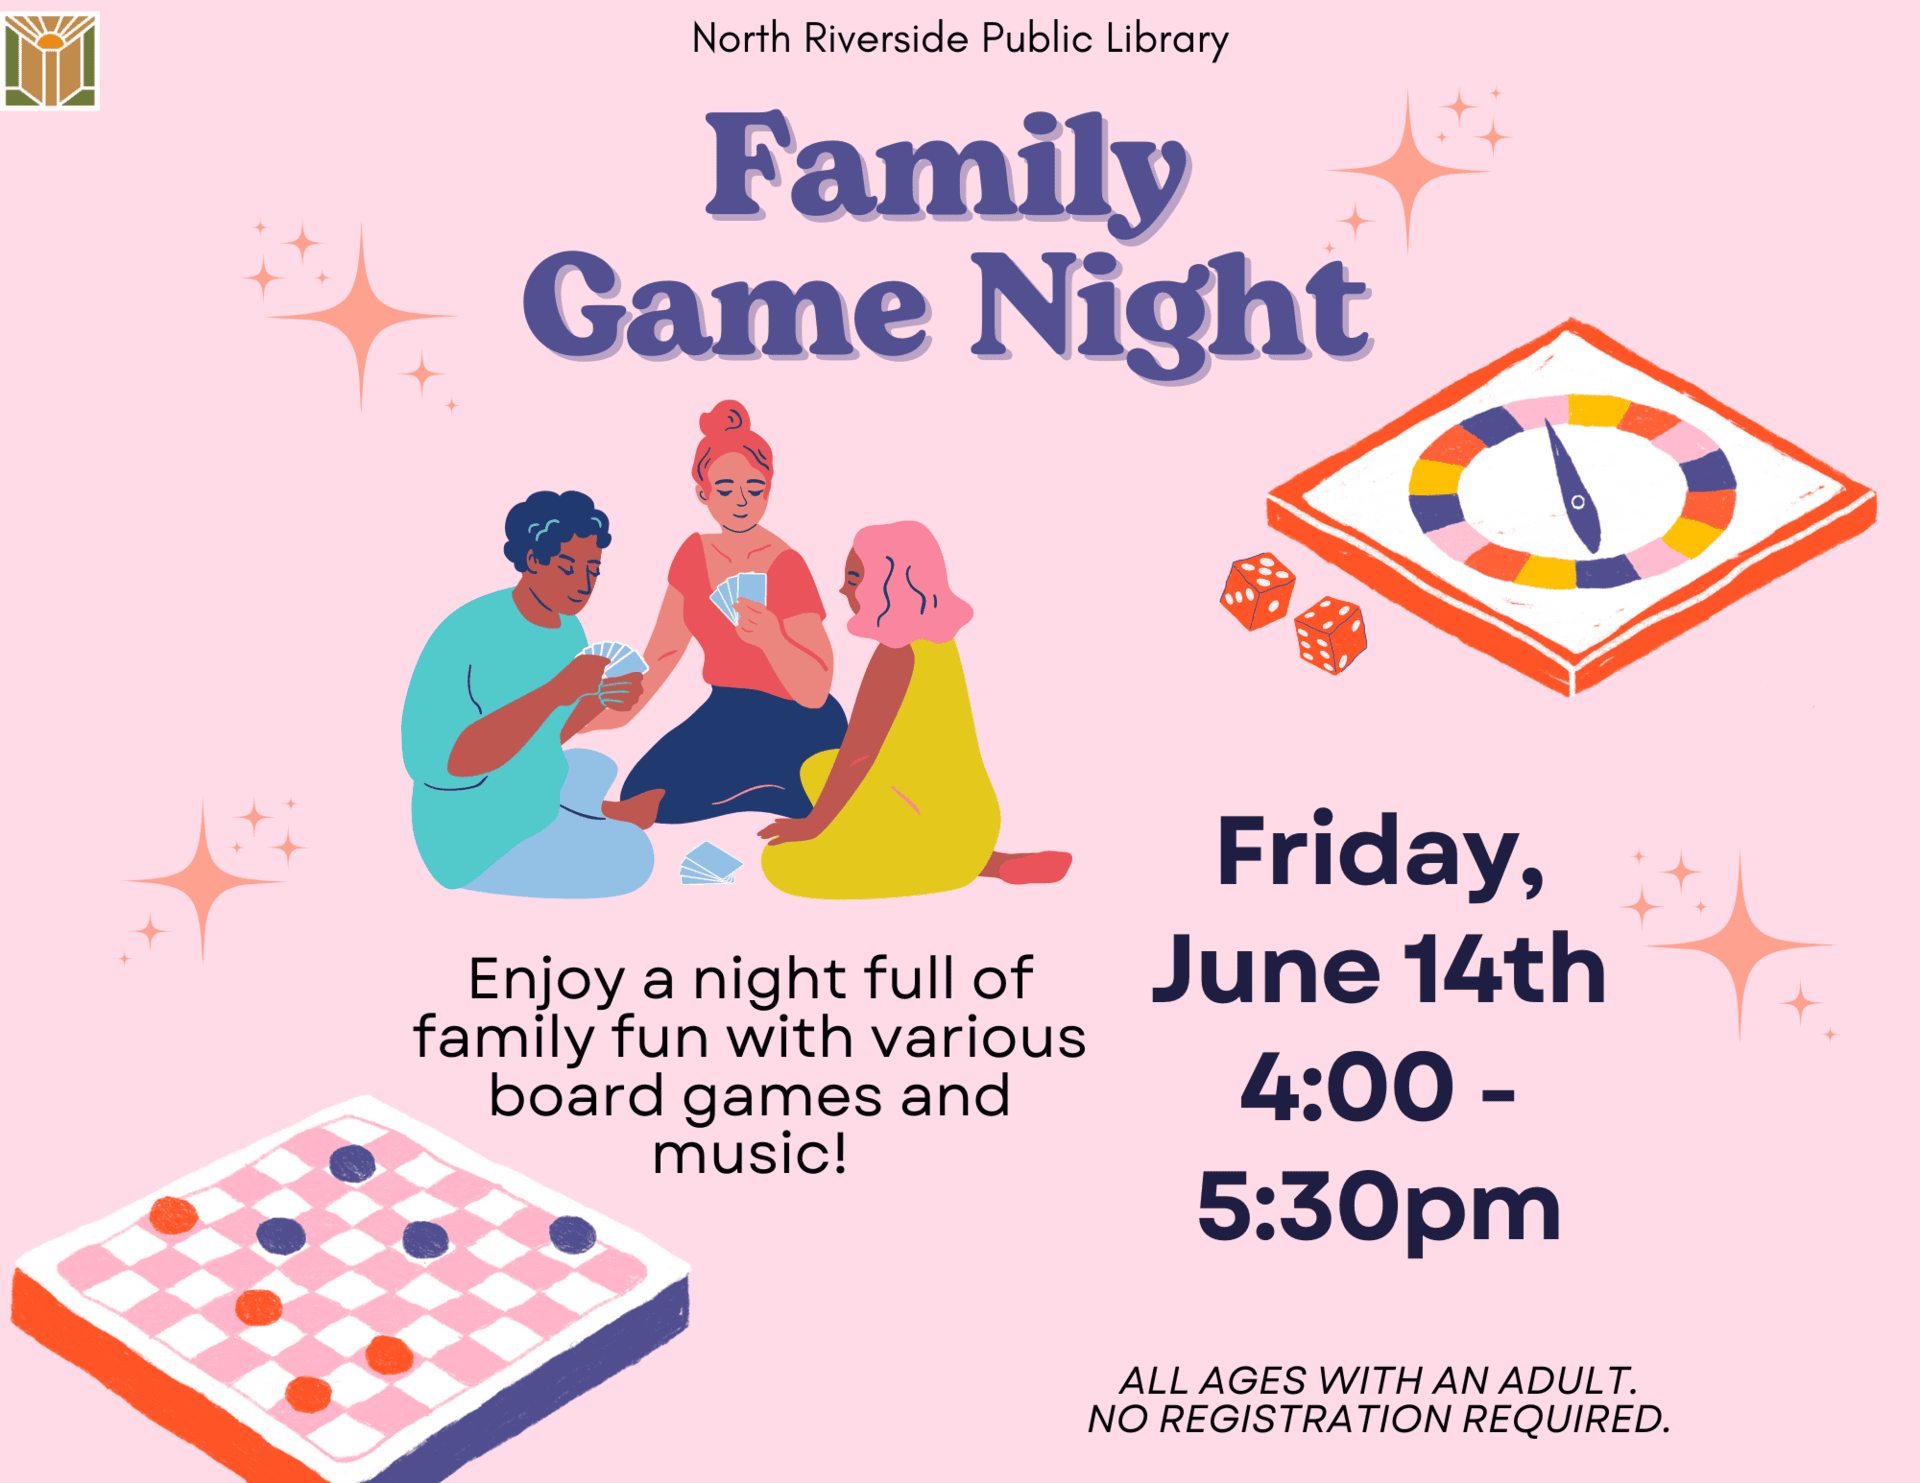 Family Game Night flyer.